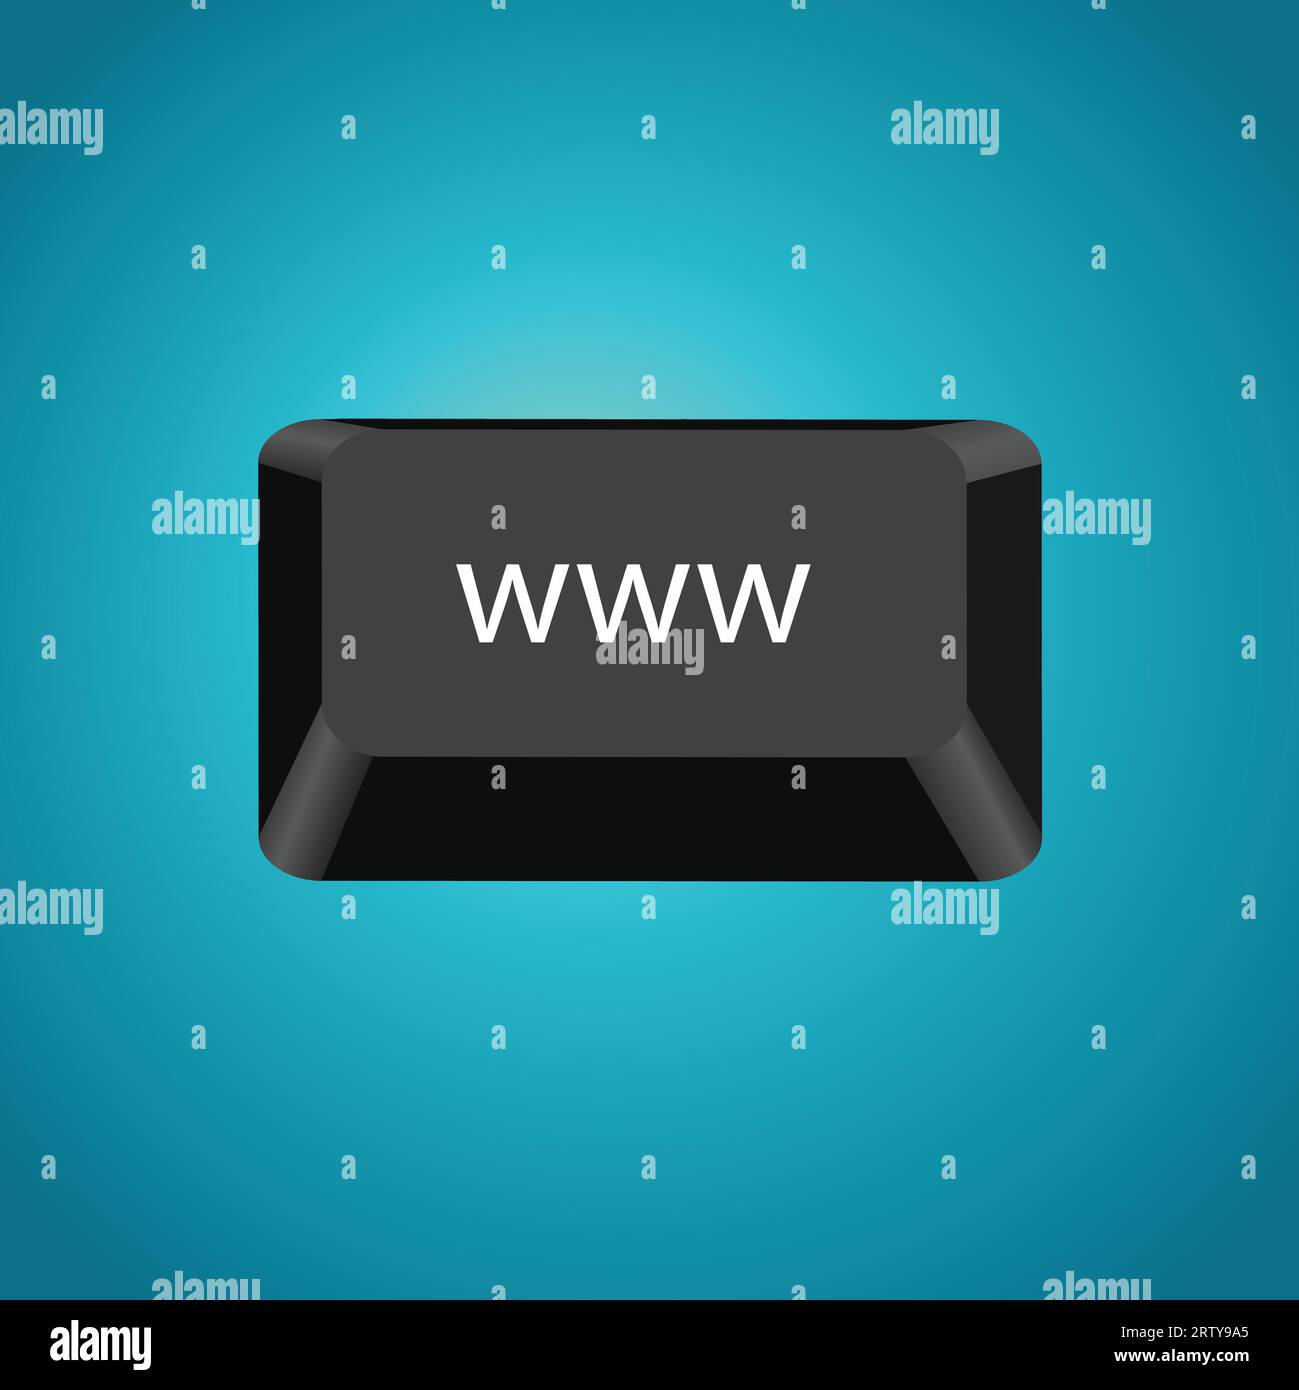 Computer key with world wide web written abbreviation on it Stock Vector